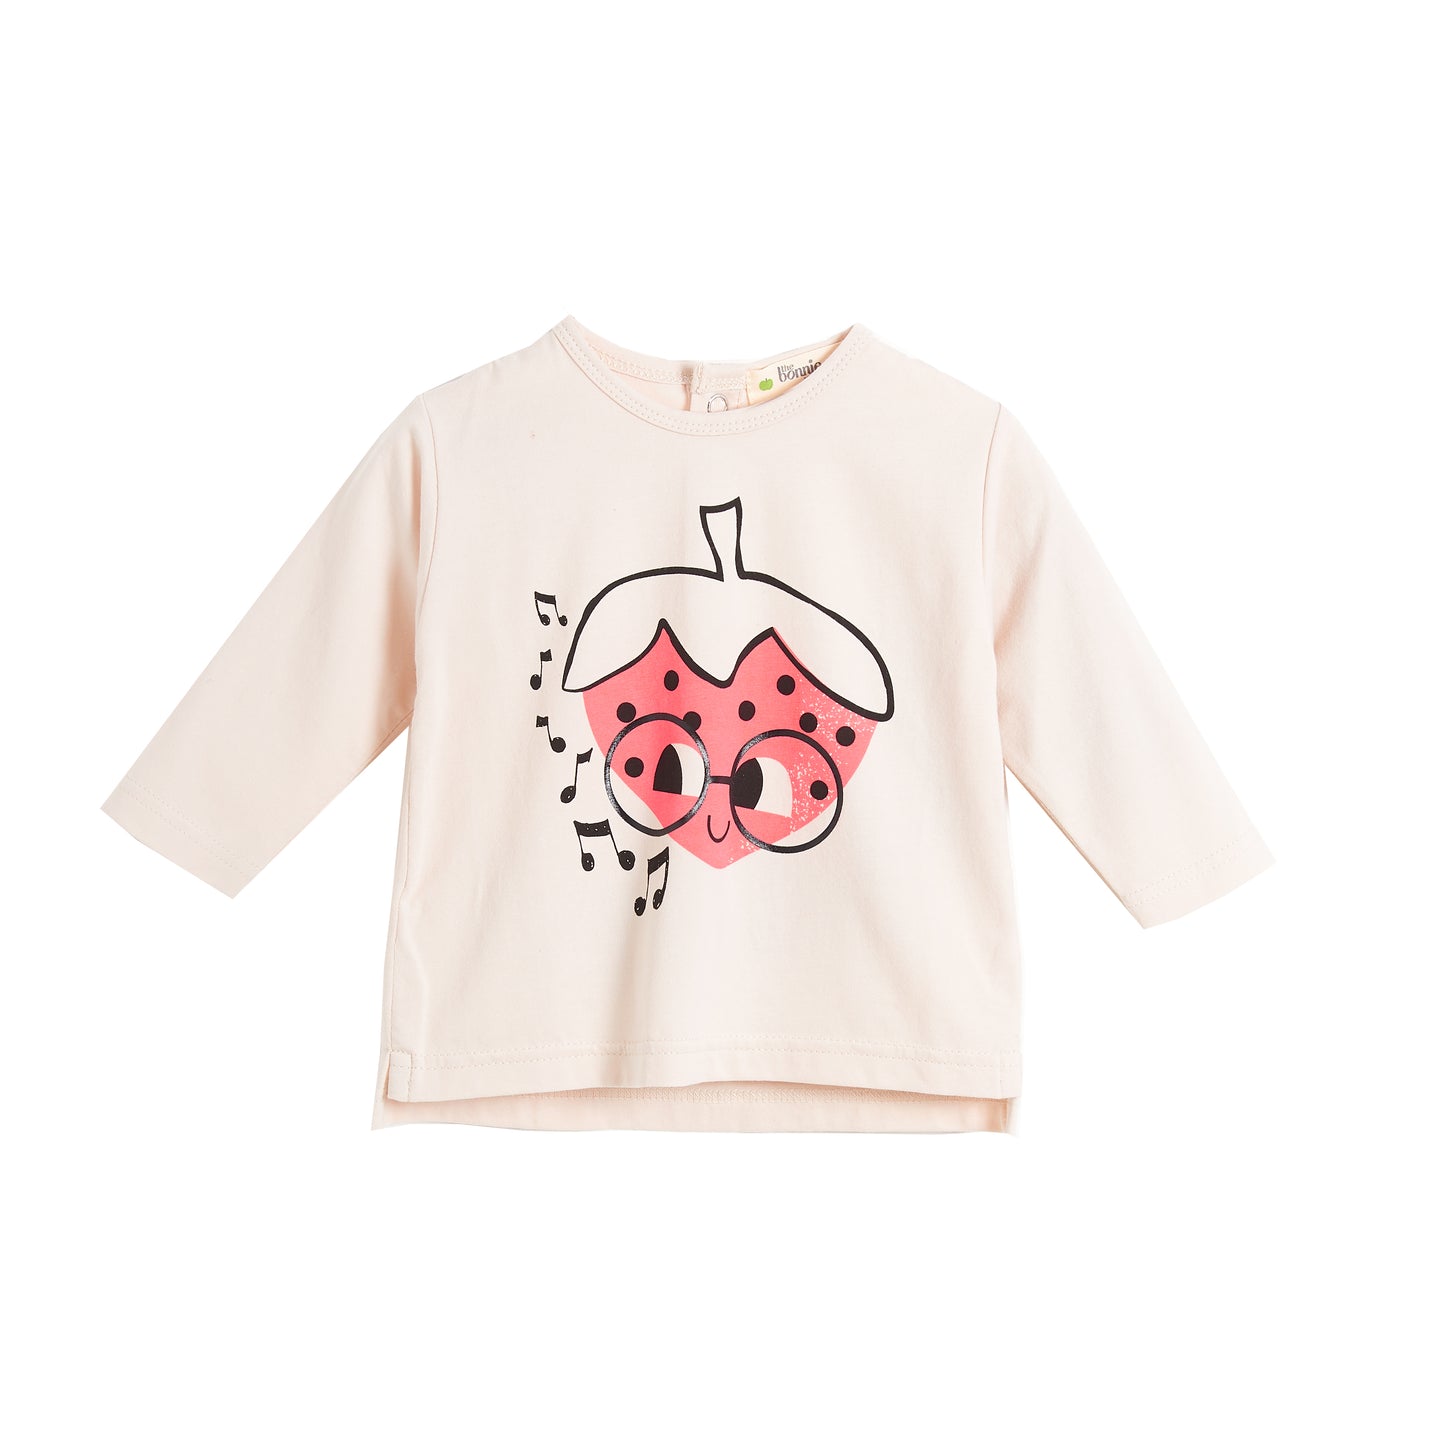 T-SHIRT - BABY - PLACED STRAWBERRY - STUDIO